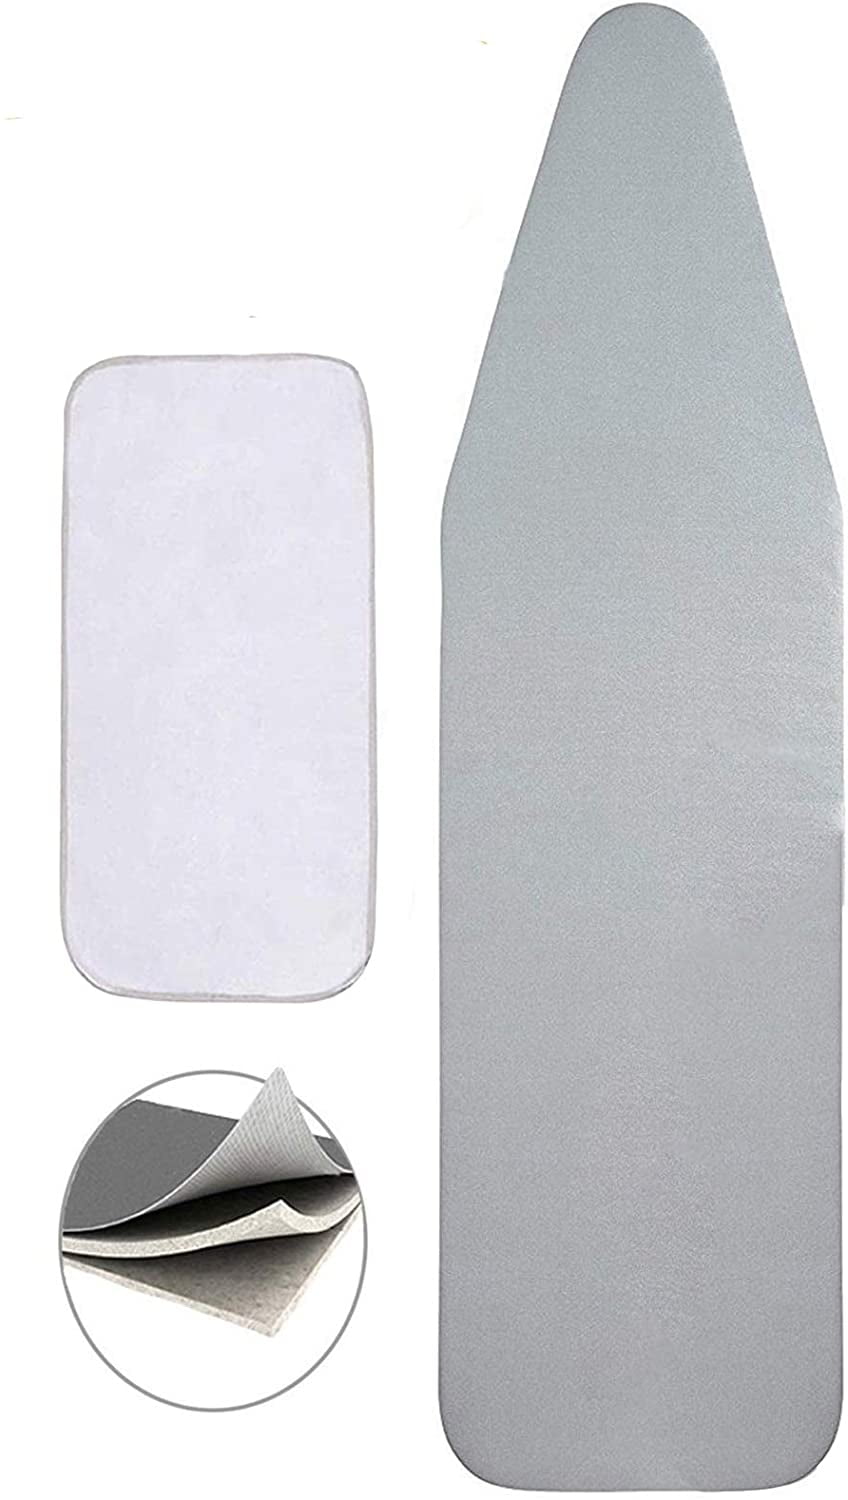 Ironing Board Cover And Pad For Extra Wide 18 X 49 Ironing Boards,Premium Heavy 